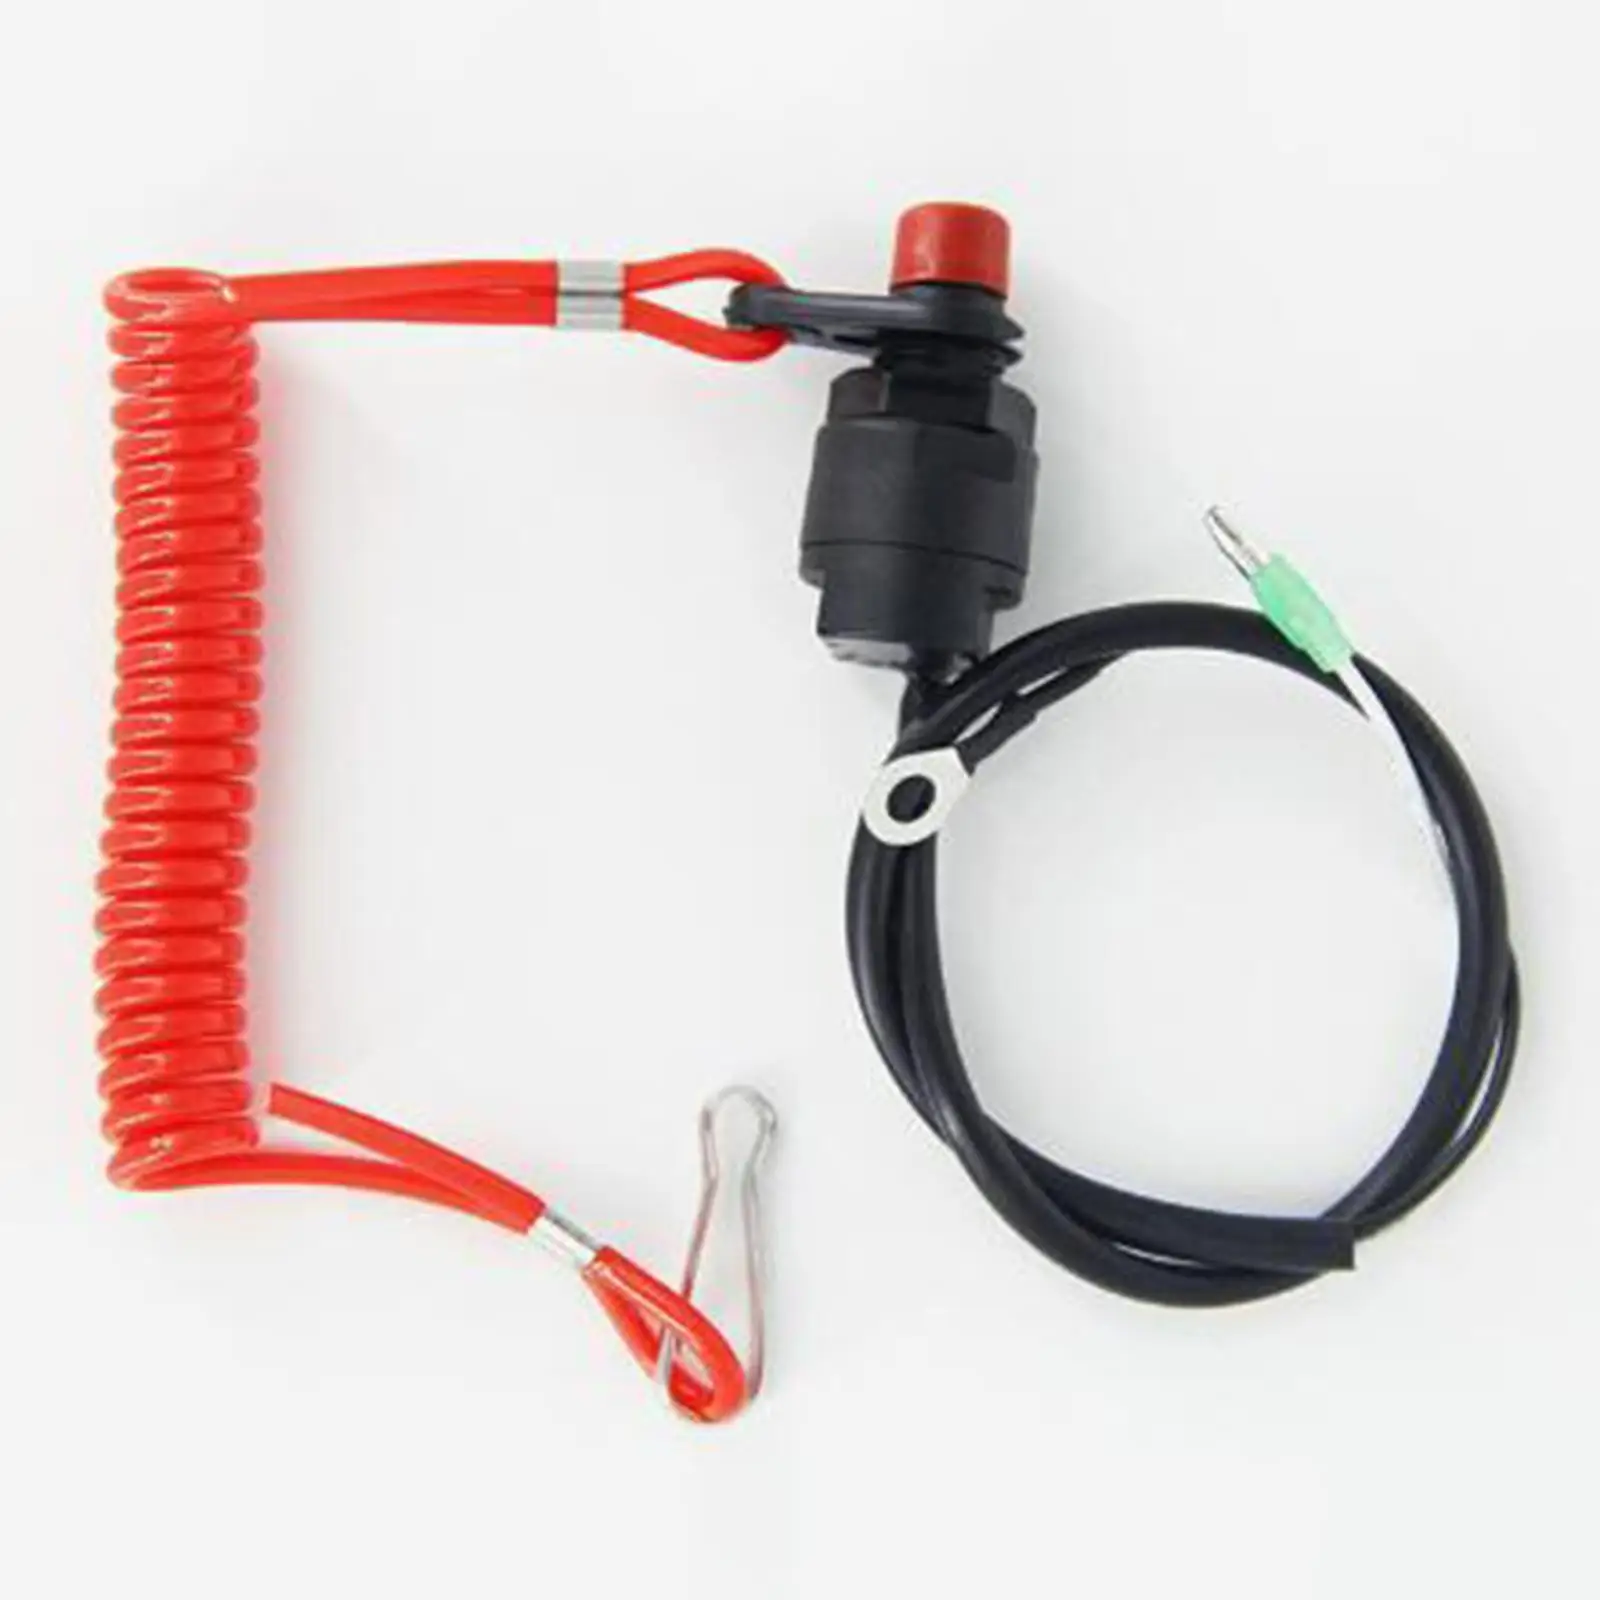 Kill Stop Switch & Safety Lanyard 689-82575-03 for Yamaha Outboard Engine Stable Performance Easy Installation